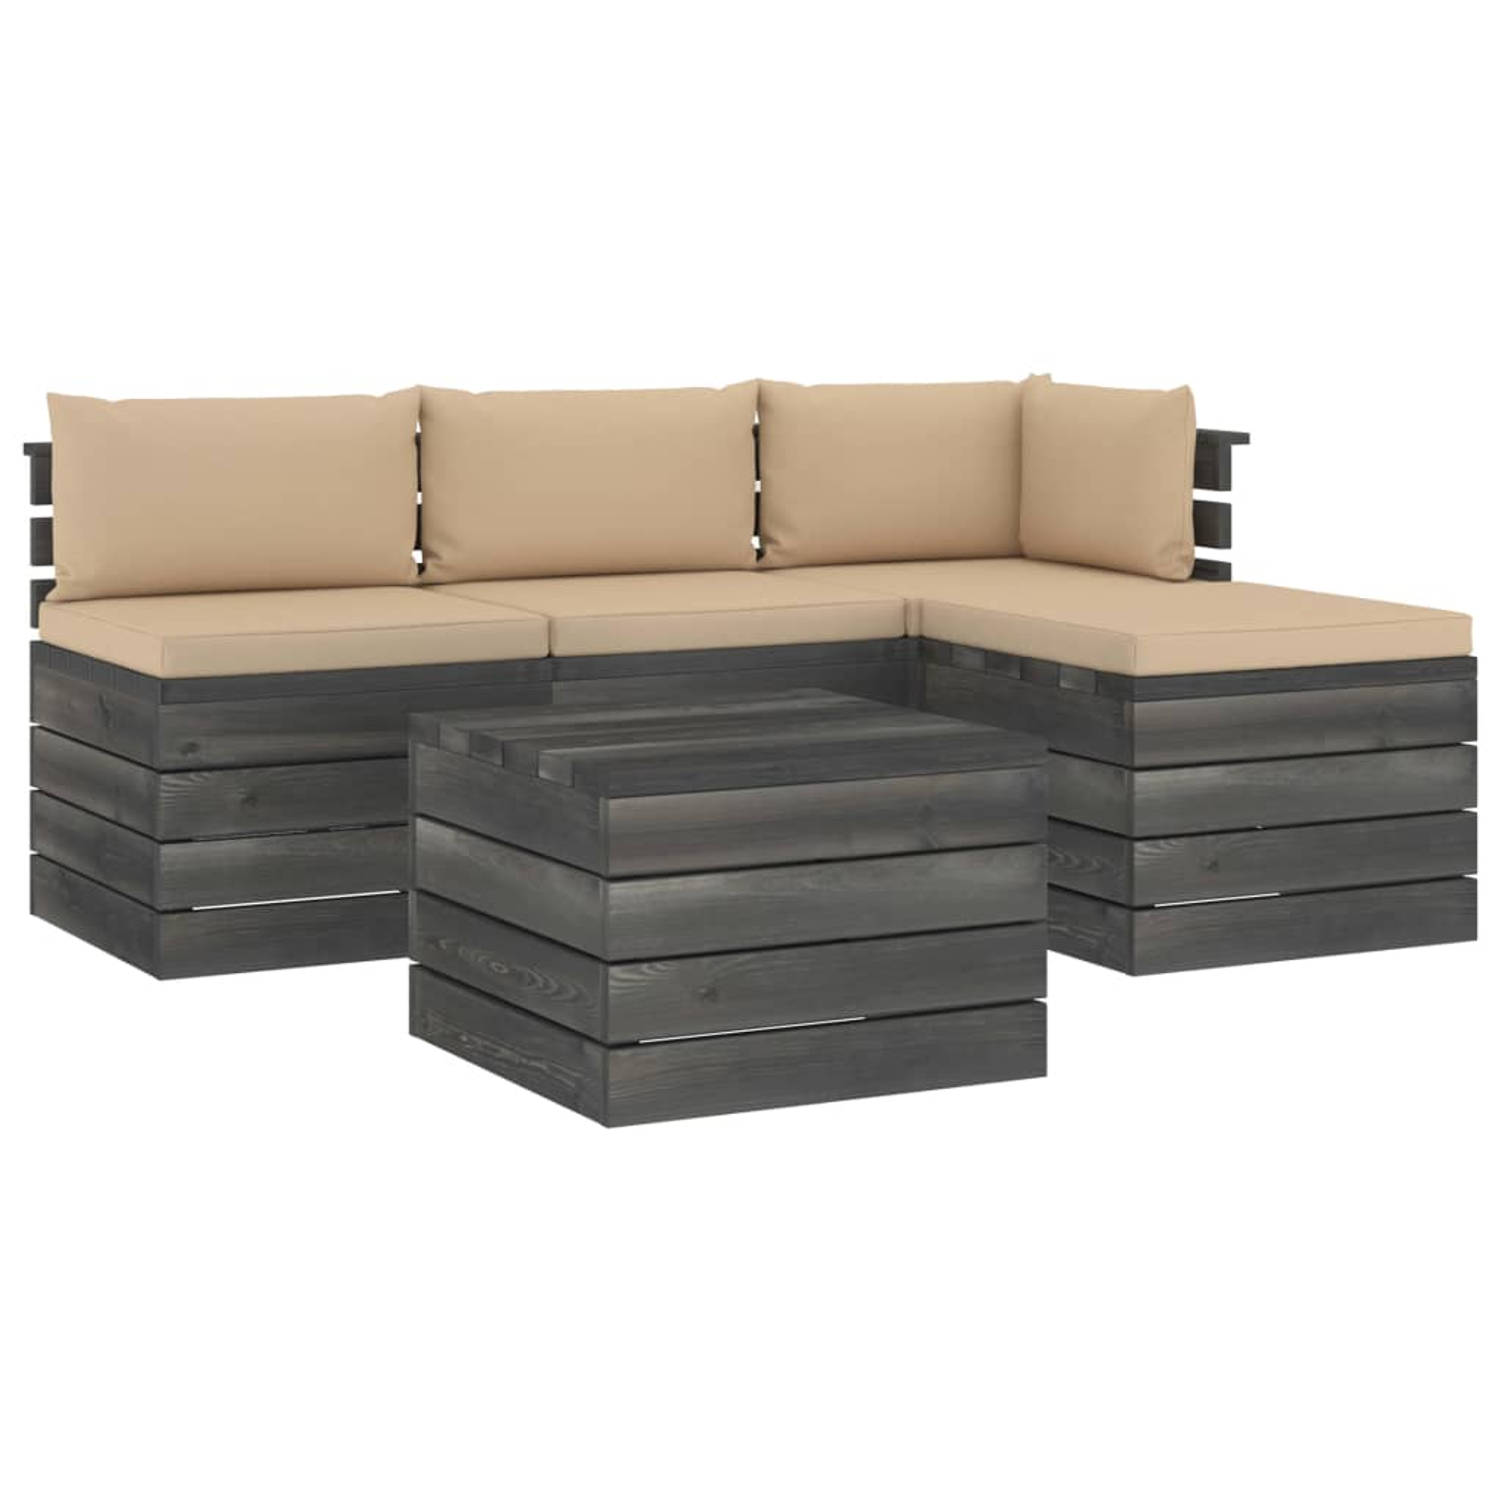 The Living Store Pallet Loungeset - Grenenhout - Beige Kussens - Modulair